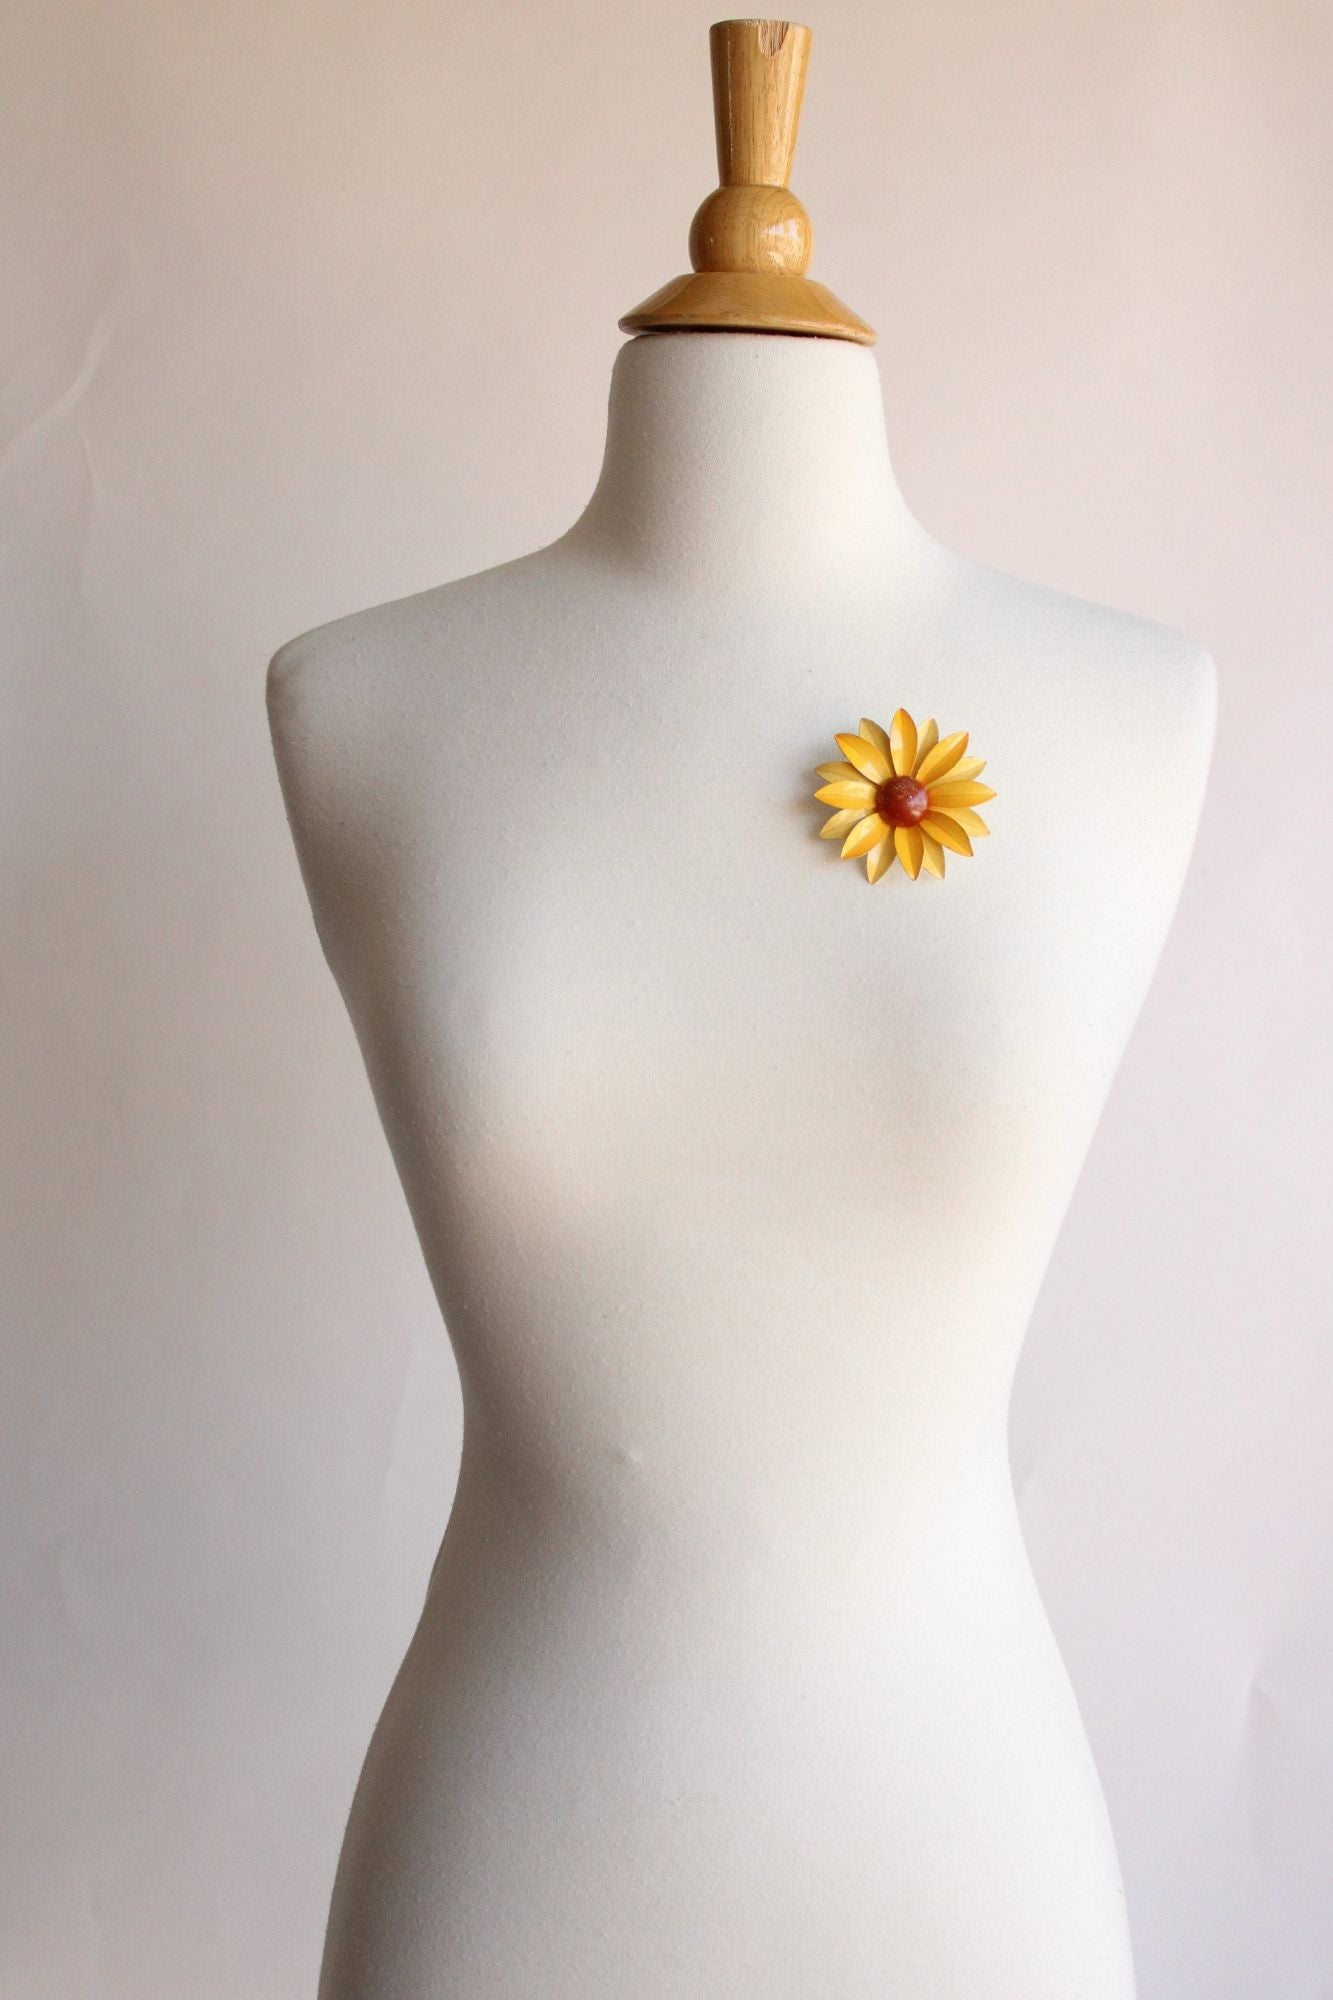 Vintage 1960s Sunflower Brooch in Yellow and Brown